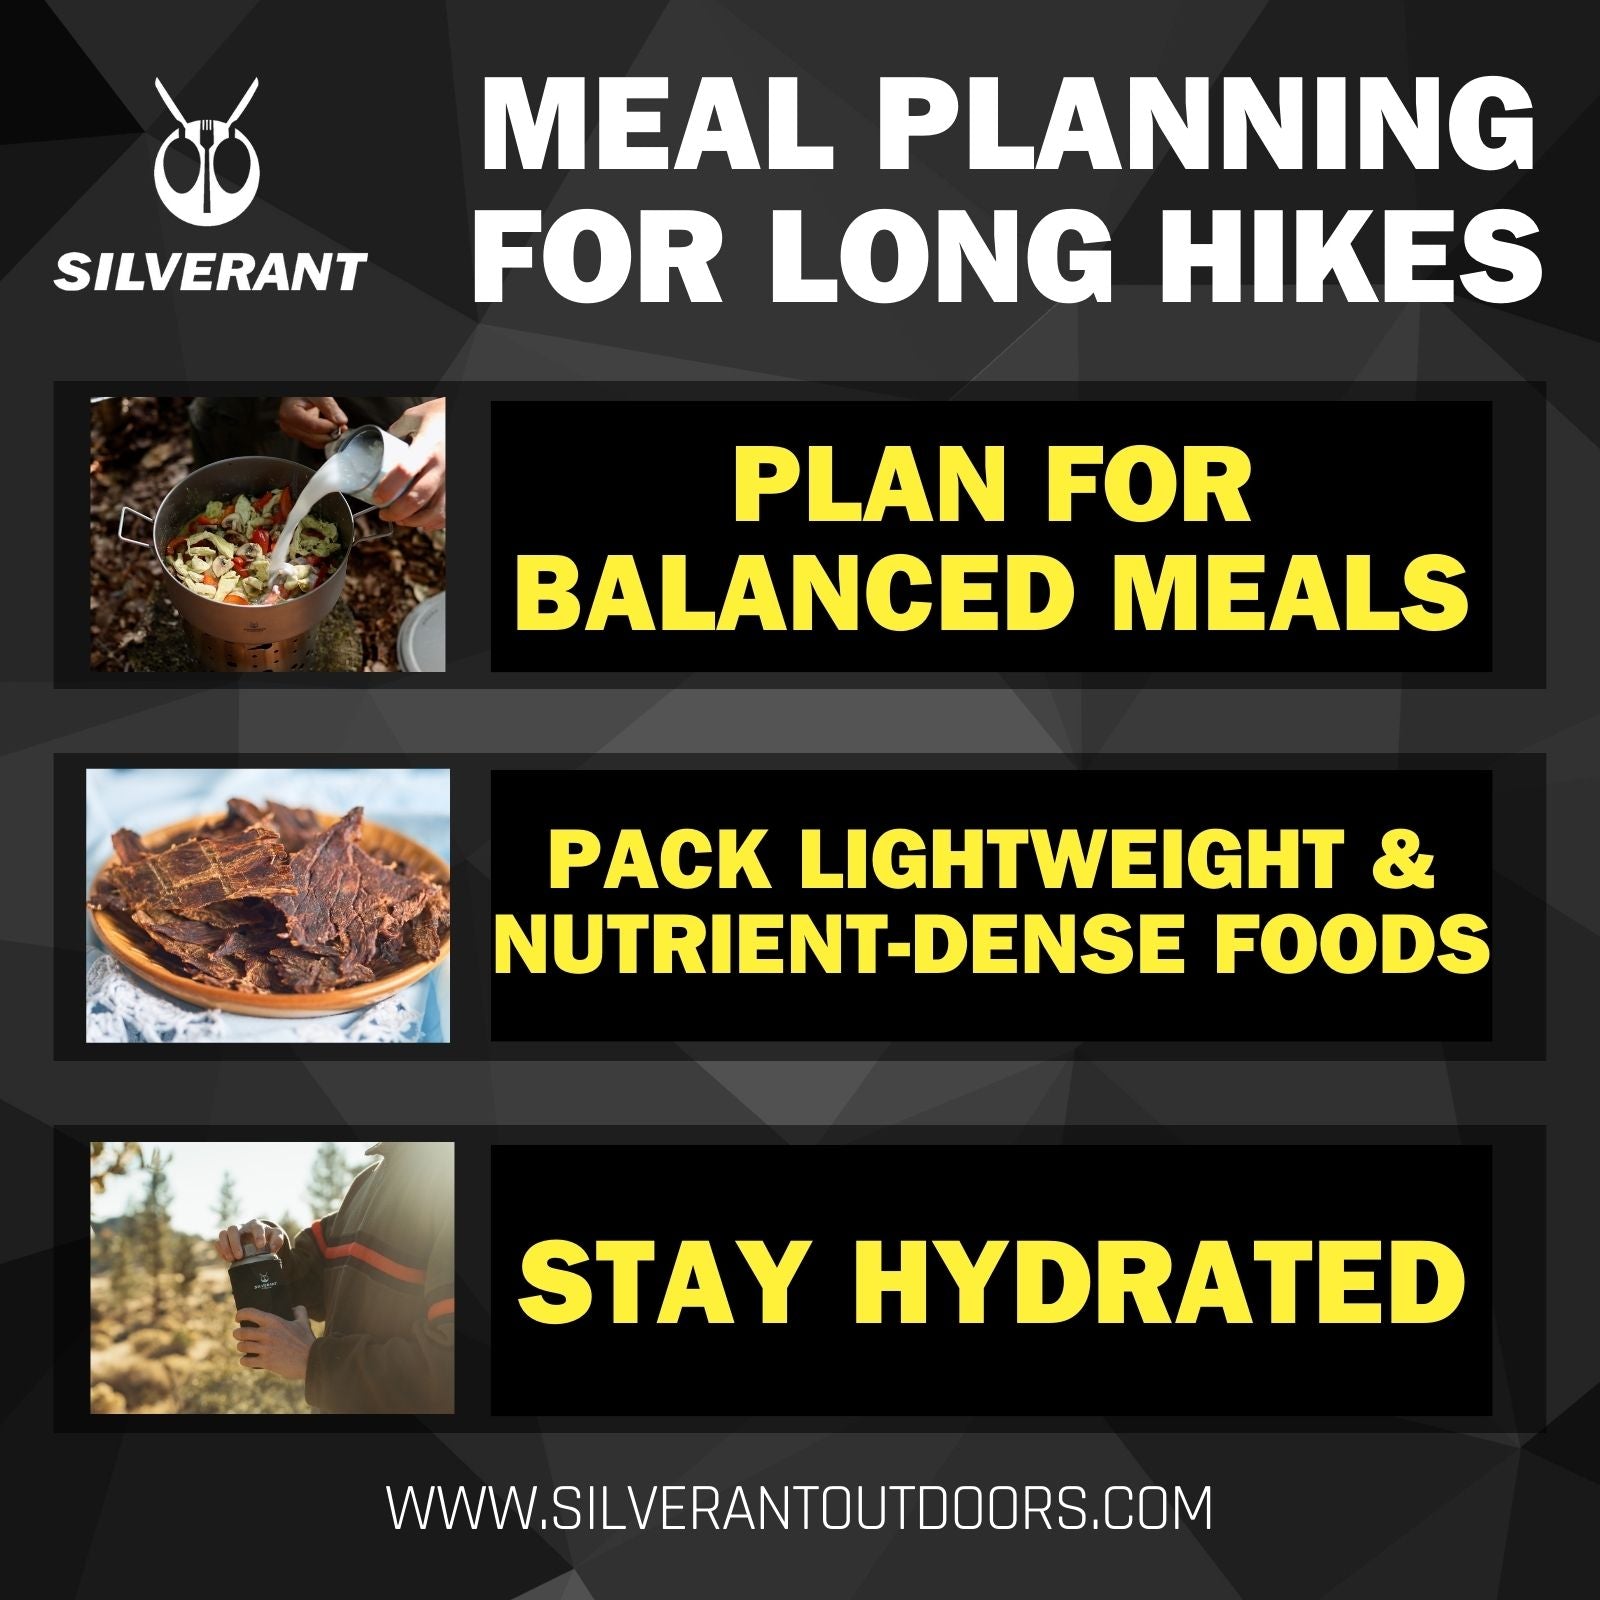 Meal Planning for Long Hikes